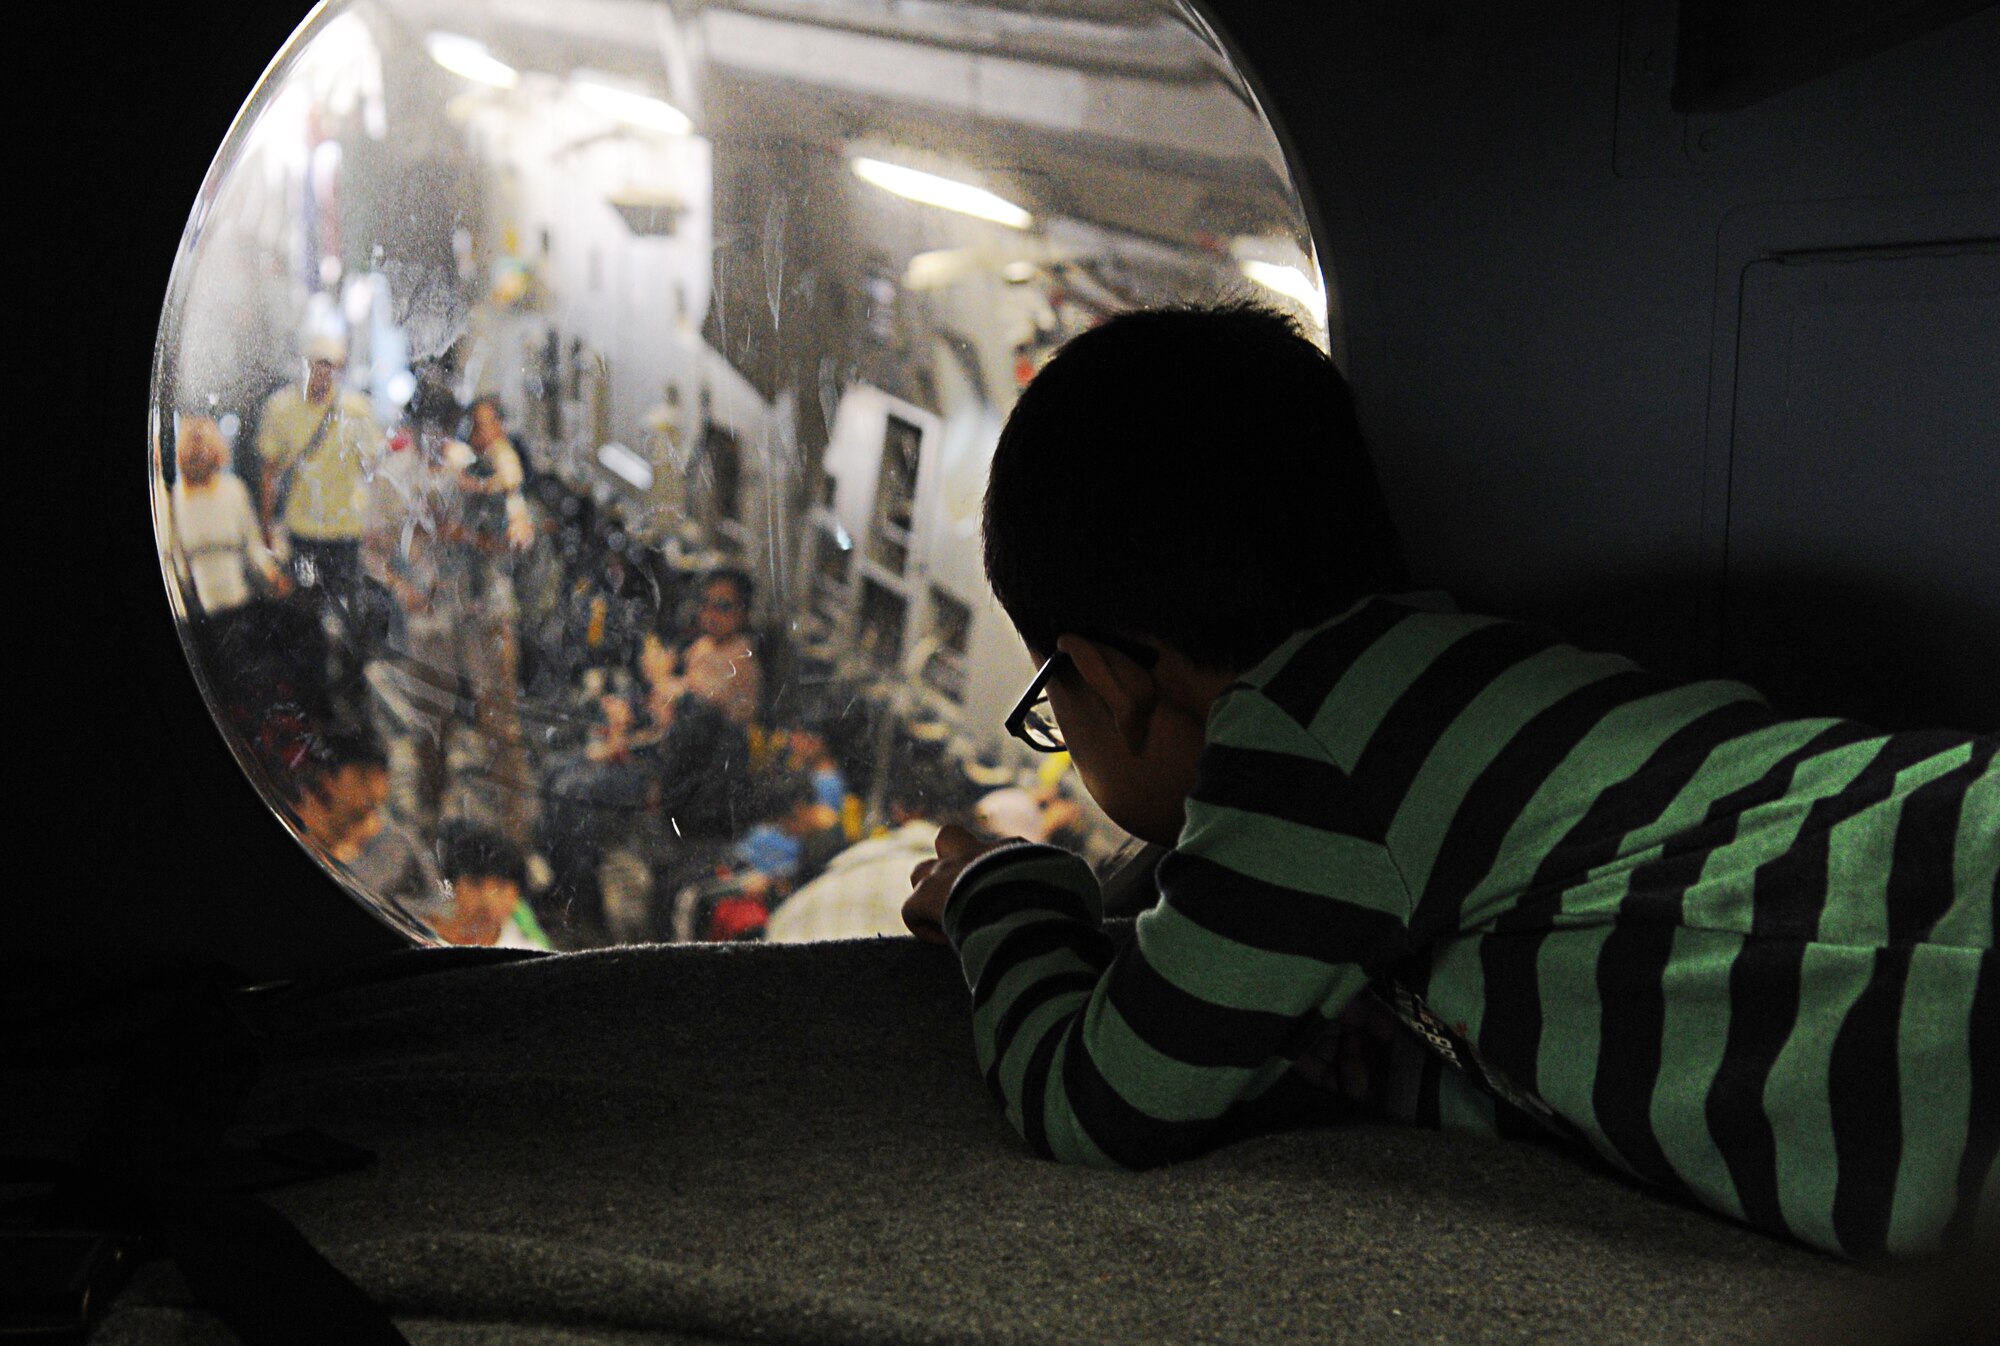 A Korean boy peers through a flight deck window into the cargo bay of a C-17 Globemaster III from the 15th Wing at Joint Base Pearl Harbor-Hickam, Hawaii, during the "Air Power Day" air show Oct. 20 at Osan Air Base, Republic of Korea. Consisting of aircrew members from the 535th Airlift Squadron at JBPHH, the demonstration team operating the C-17 fulfills a rare mission of showcasing C-17 capabilities at air shows in the Pacific theater and western United States. (U.S. Air Force photo by Senior Airman Lauren Main) 